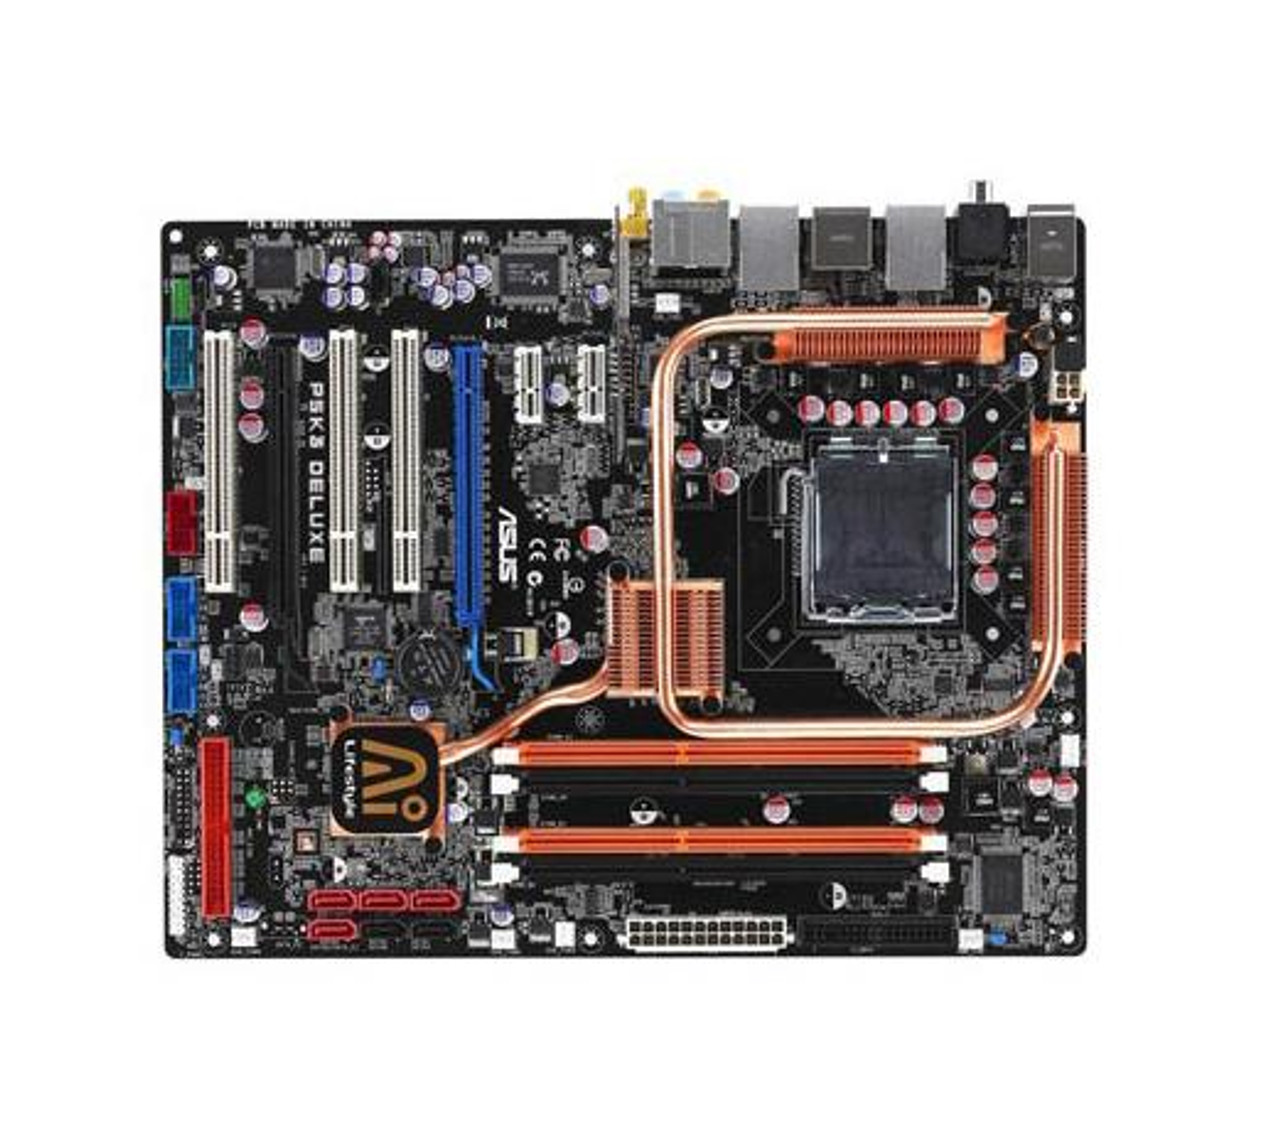 P5K3DLX ASUS Socket LGA 775 Intel P35 + ICH9R Chipset Core 2 Extreme/ Core  2 Duo/ Core 2 Quad Processors Support Socket ATX Motherboard (Refurbished)